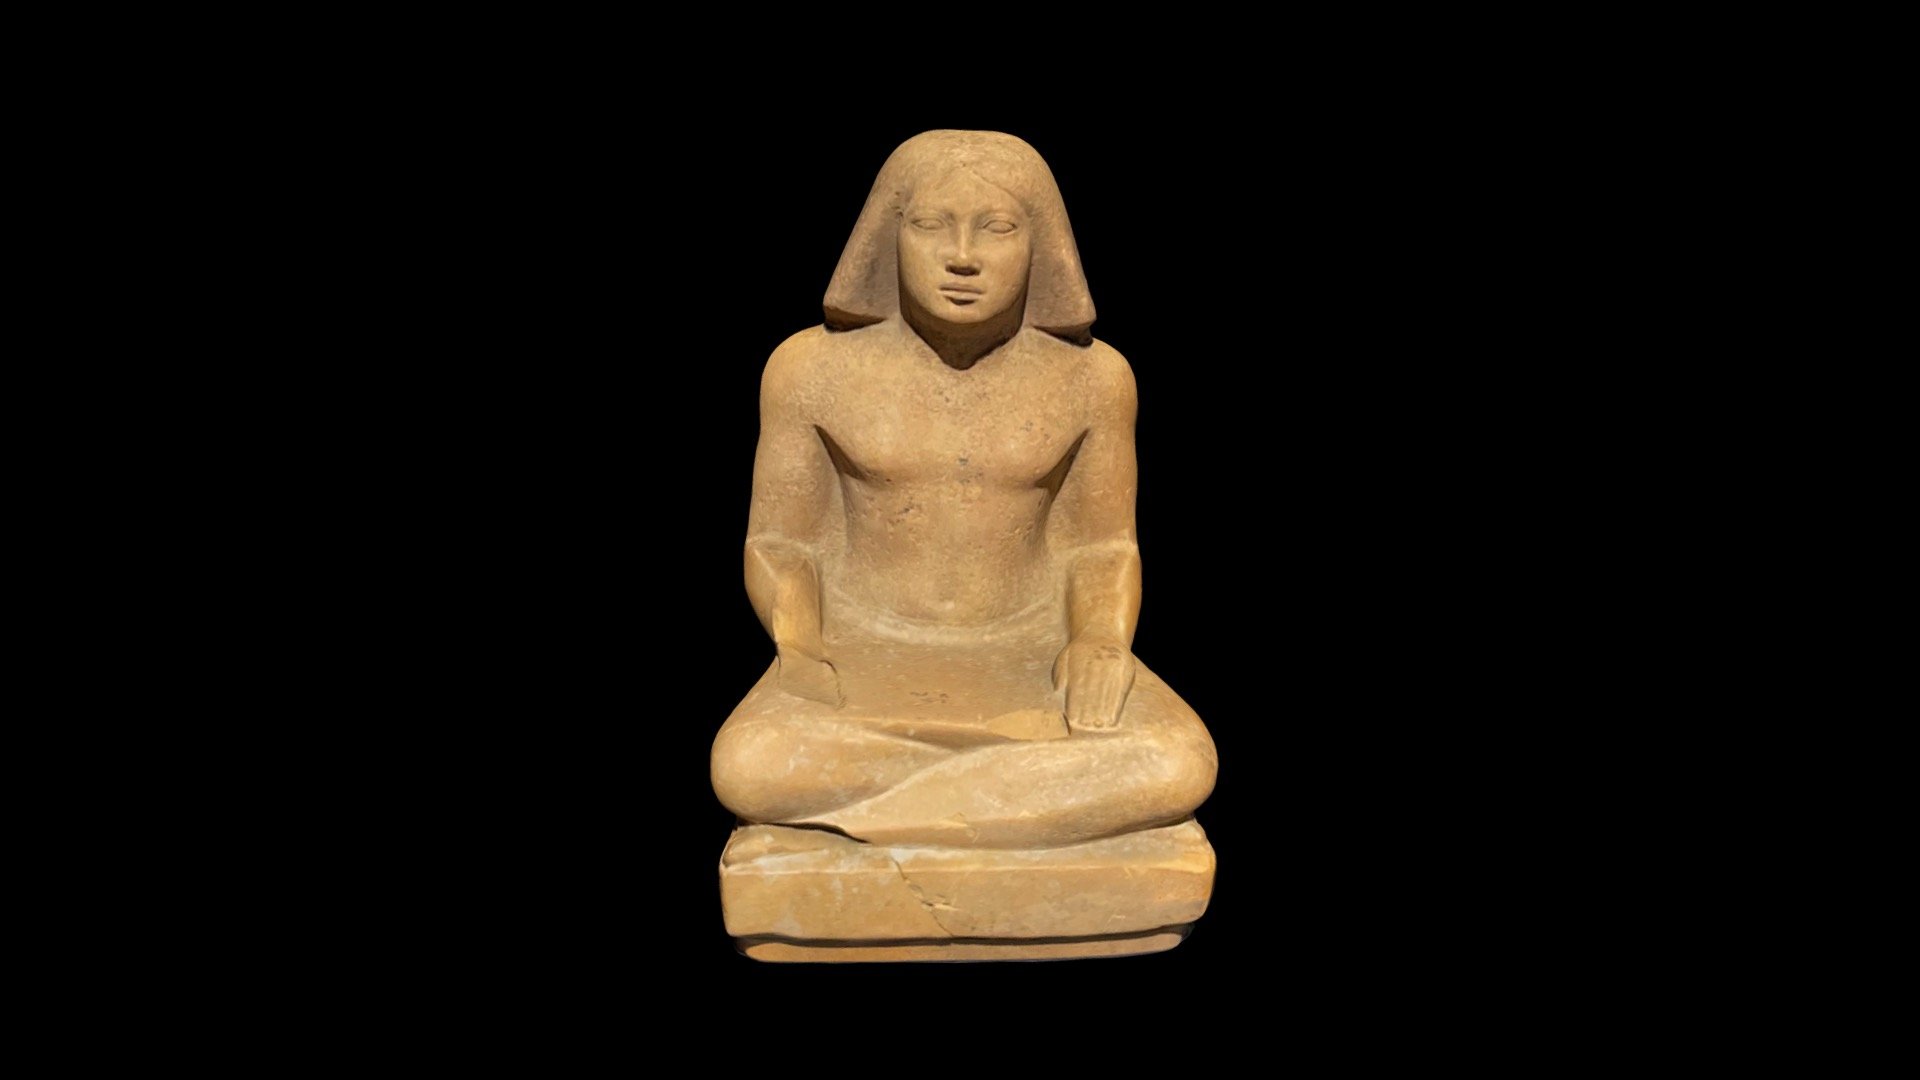 Egyptian Old Kingdom, Dynasty 4, reign of Menkaura 2490–2472 B.C. Findspot: Egypt, Giza, Menkaura Cemetery, MQ 1

Height x width x depth: 30.5 x 21.5 x 16 cm (12 x 8 7/16 x 6 5/16 in.)

Harvard University—Boston Museum of Fine Arts Expedition

Museum of Fine Arts 13.3140

Buff limestone

https://collections.mfa.org/objects/140748/prince-khuenra-as-a-scribe?ctx=cb087c9a-ab9a-4c1e-94b7-e6b24951068b&amp;idx=0

Created with Polycam by Peter Der Manuelian, July 7, 2023

This model should be used for non-commercial, study purposes only 3d model